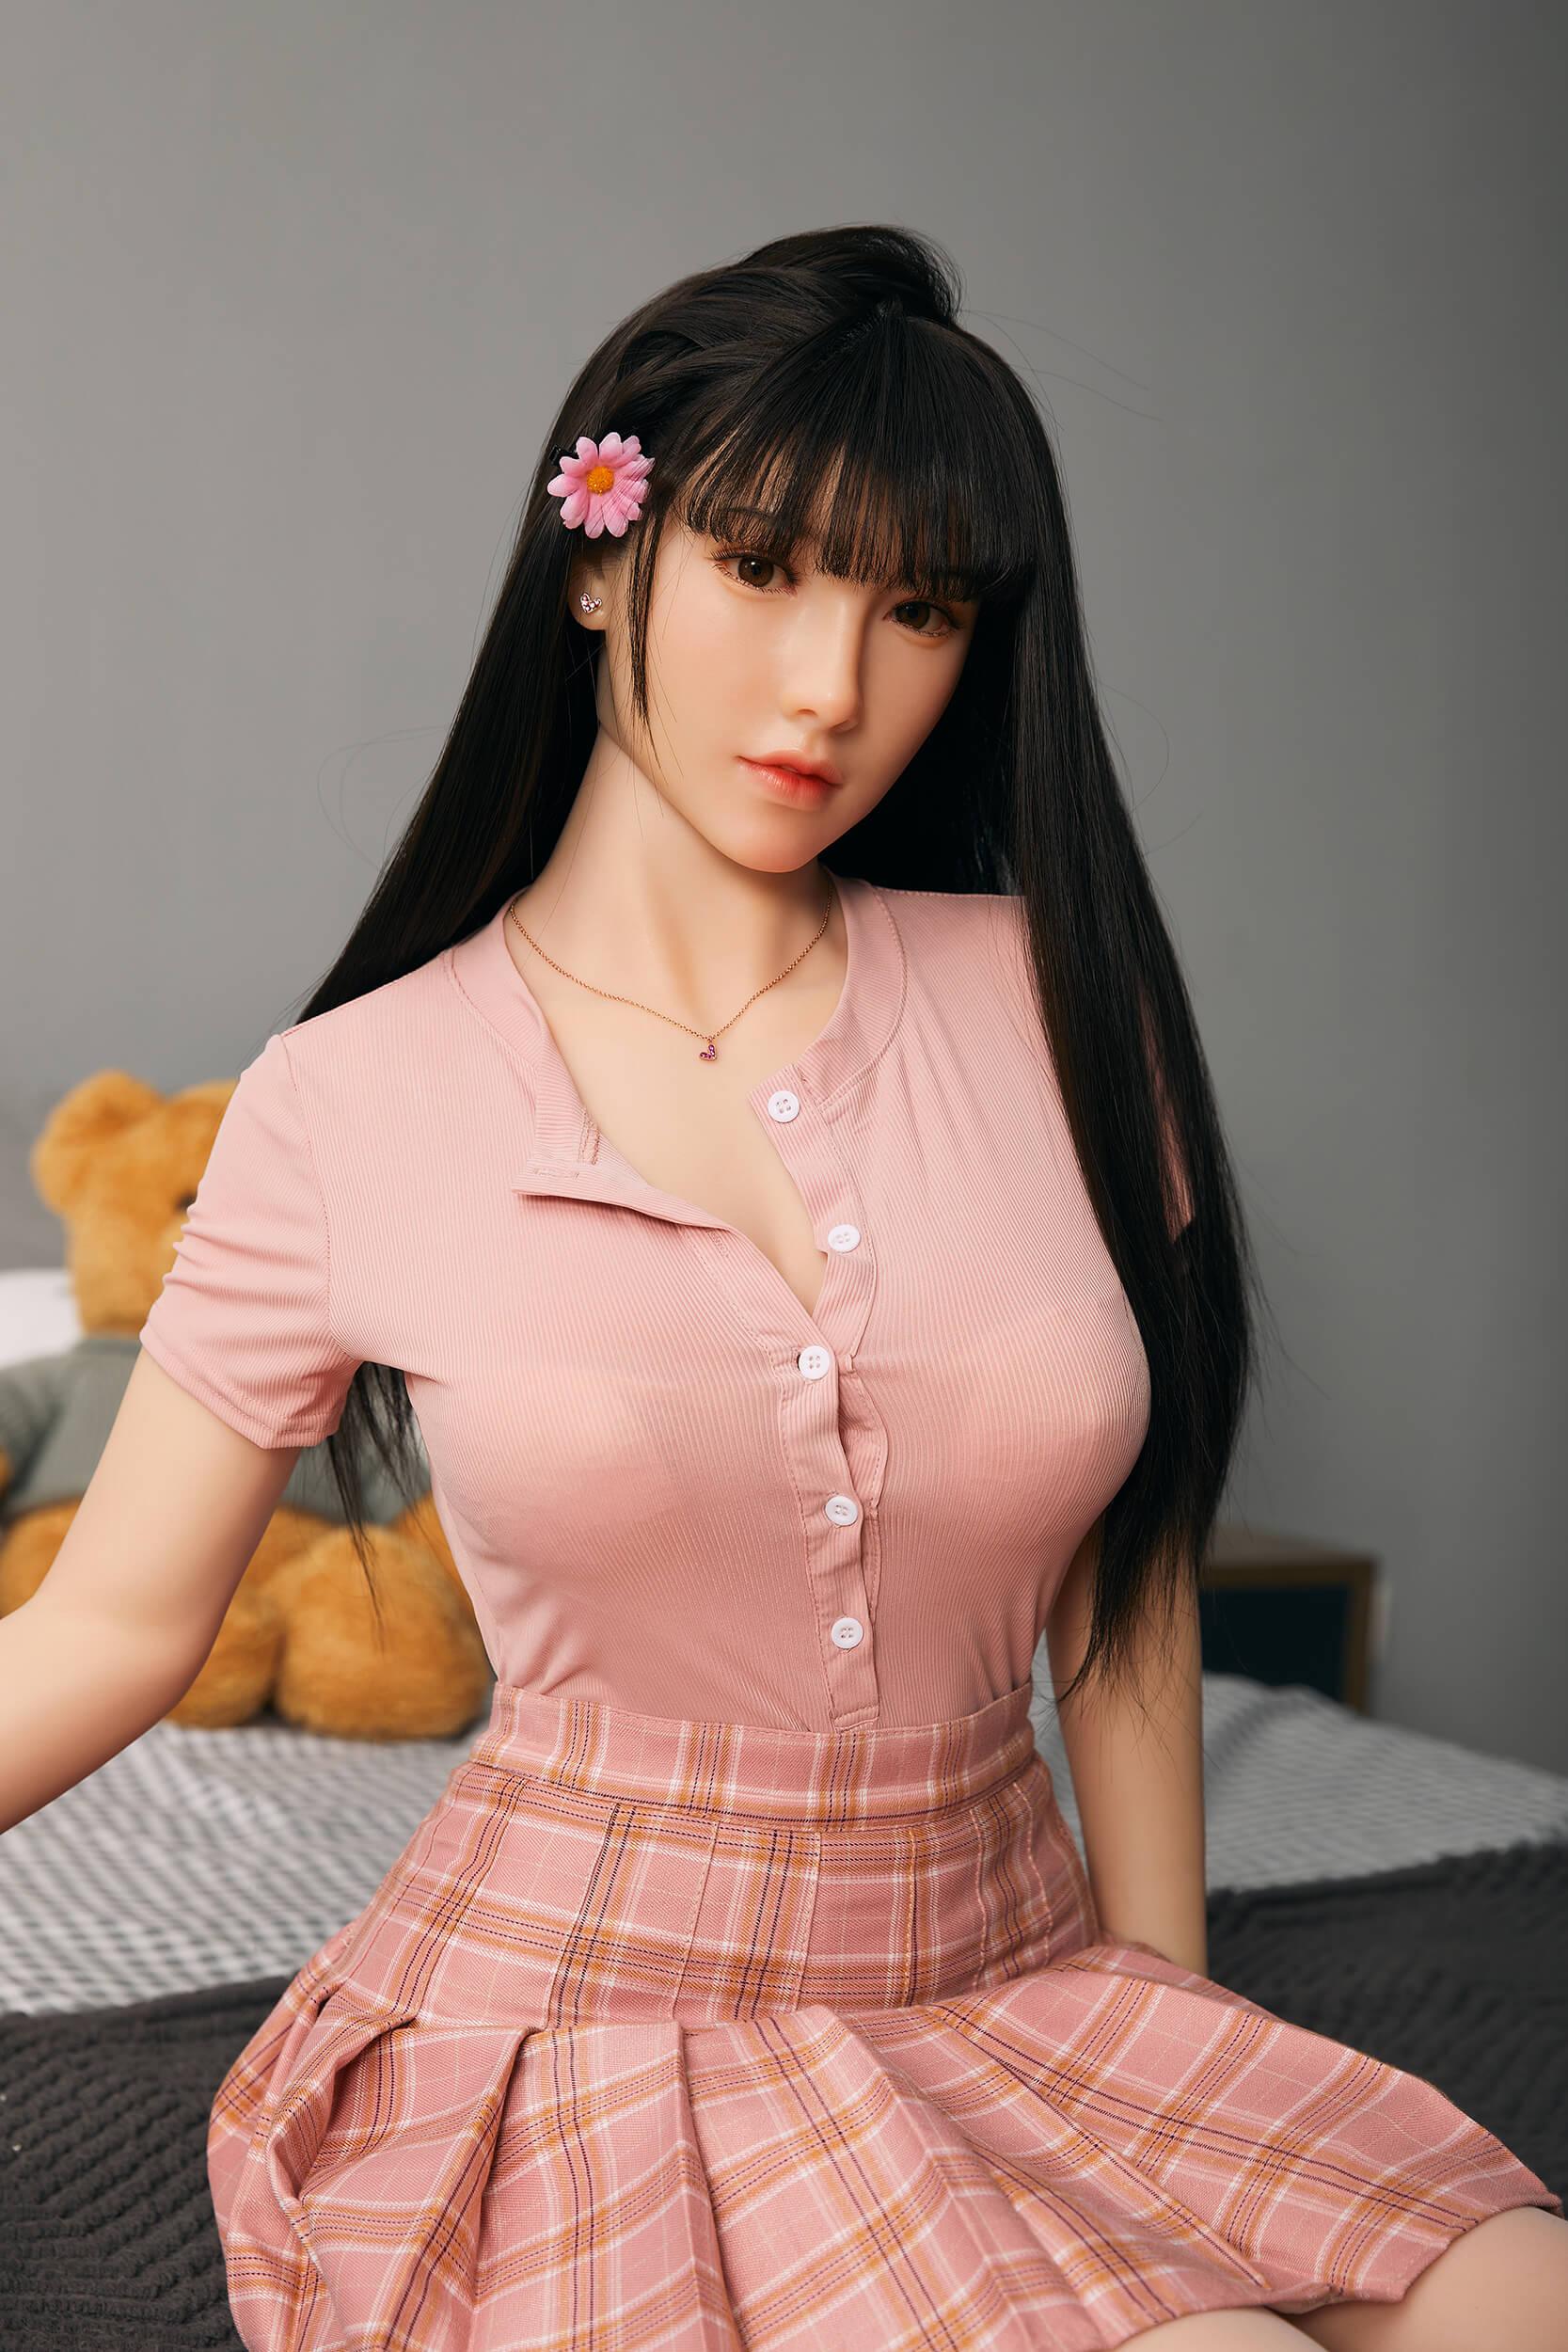 Godness Silicone Sex Dolls Queena-160cm 5ft3 D Cup - USbbdoll